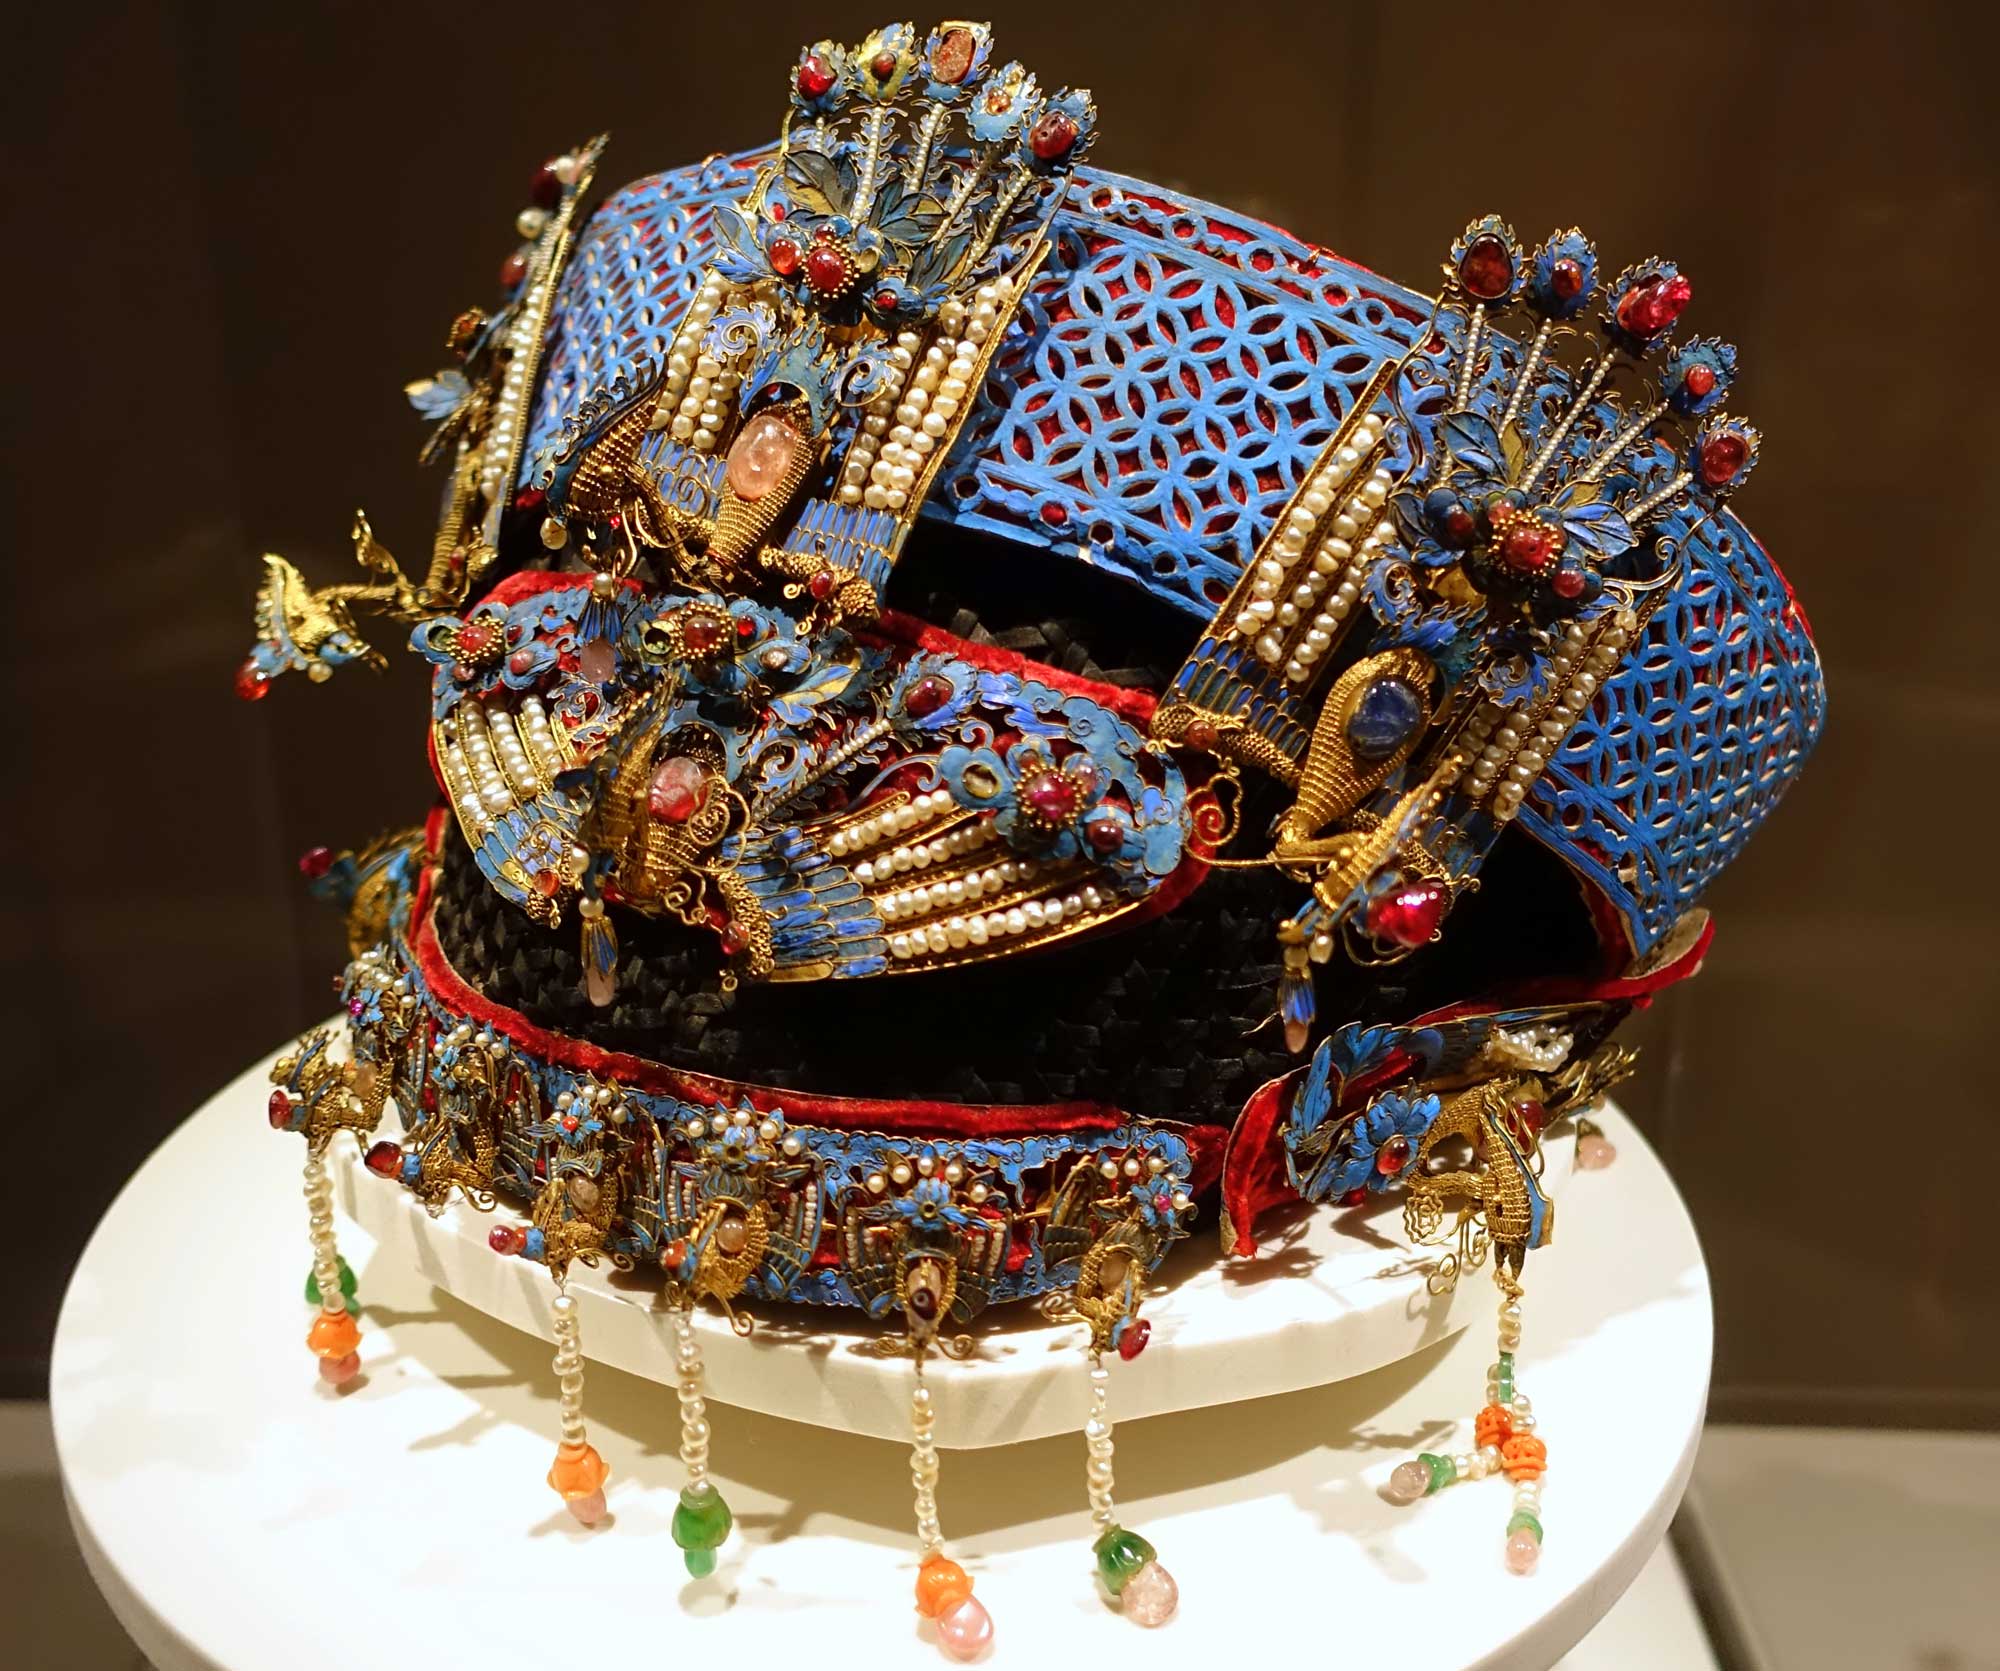 An elaborate Chinese noblewoman's phoenix crown dating to the late 1800s and inlaid with blue kingfisher feathers.